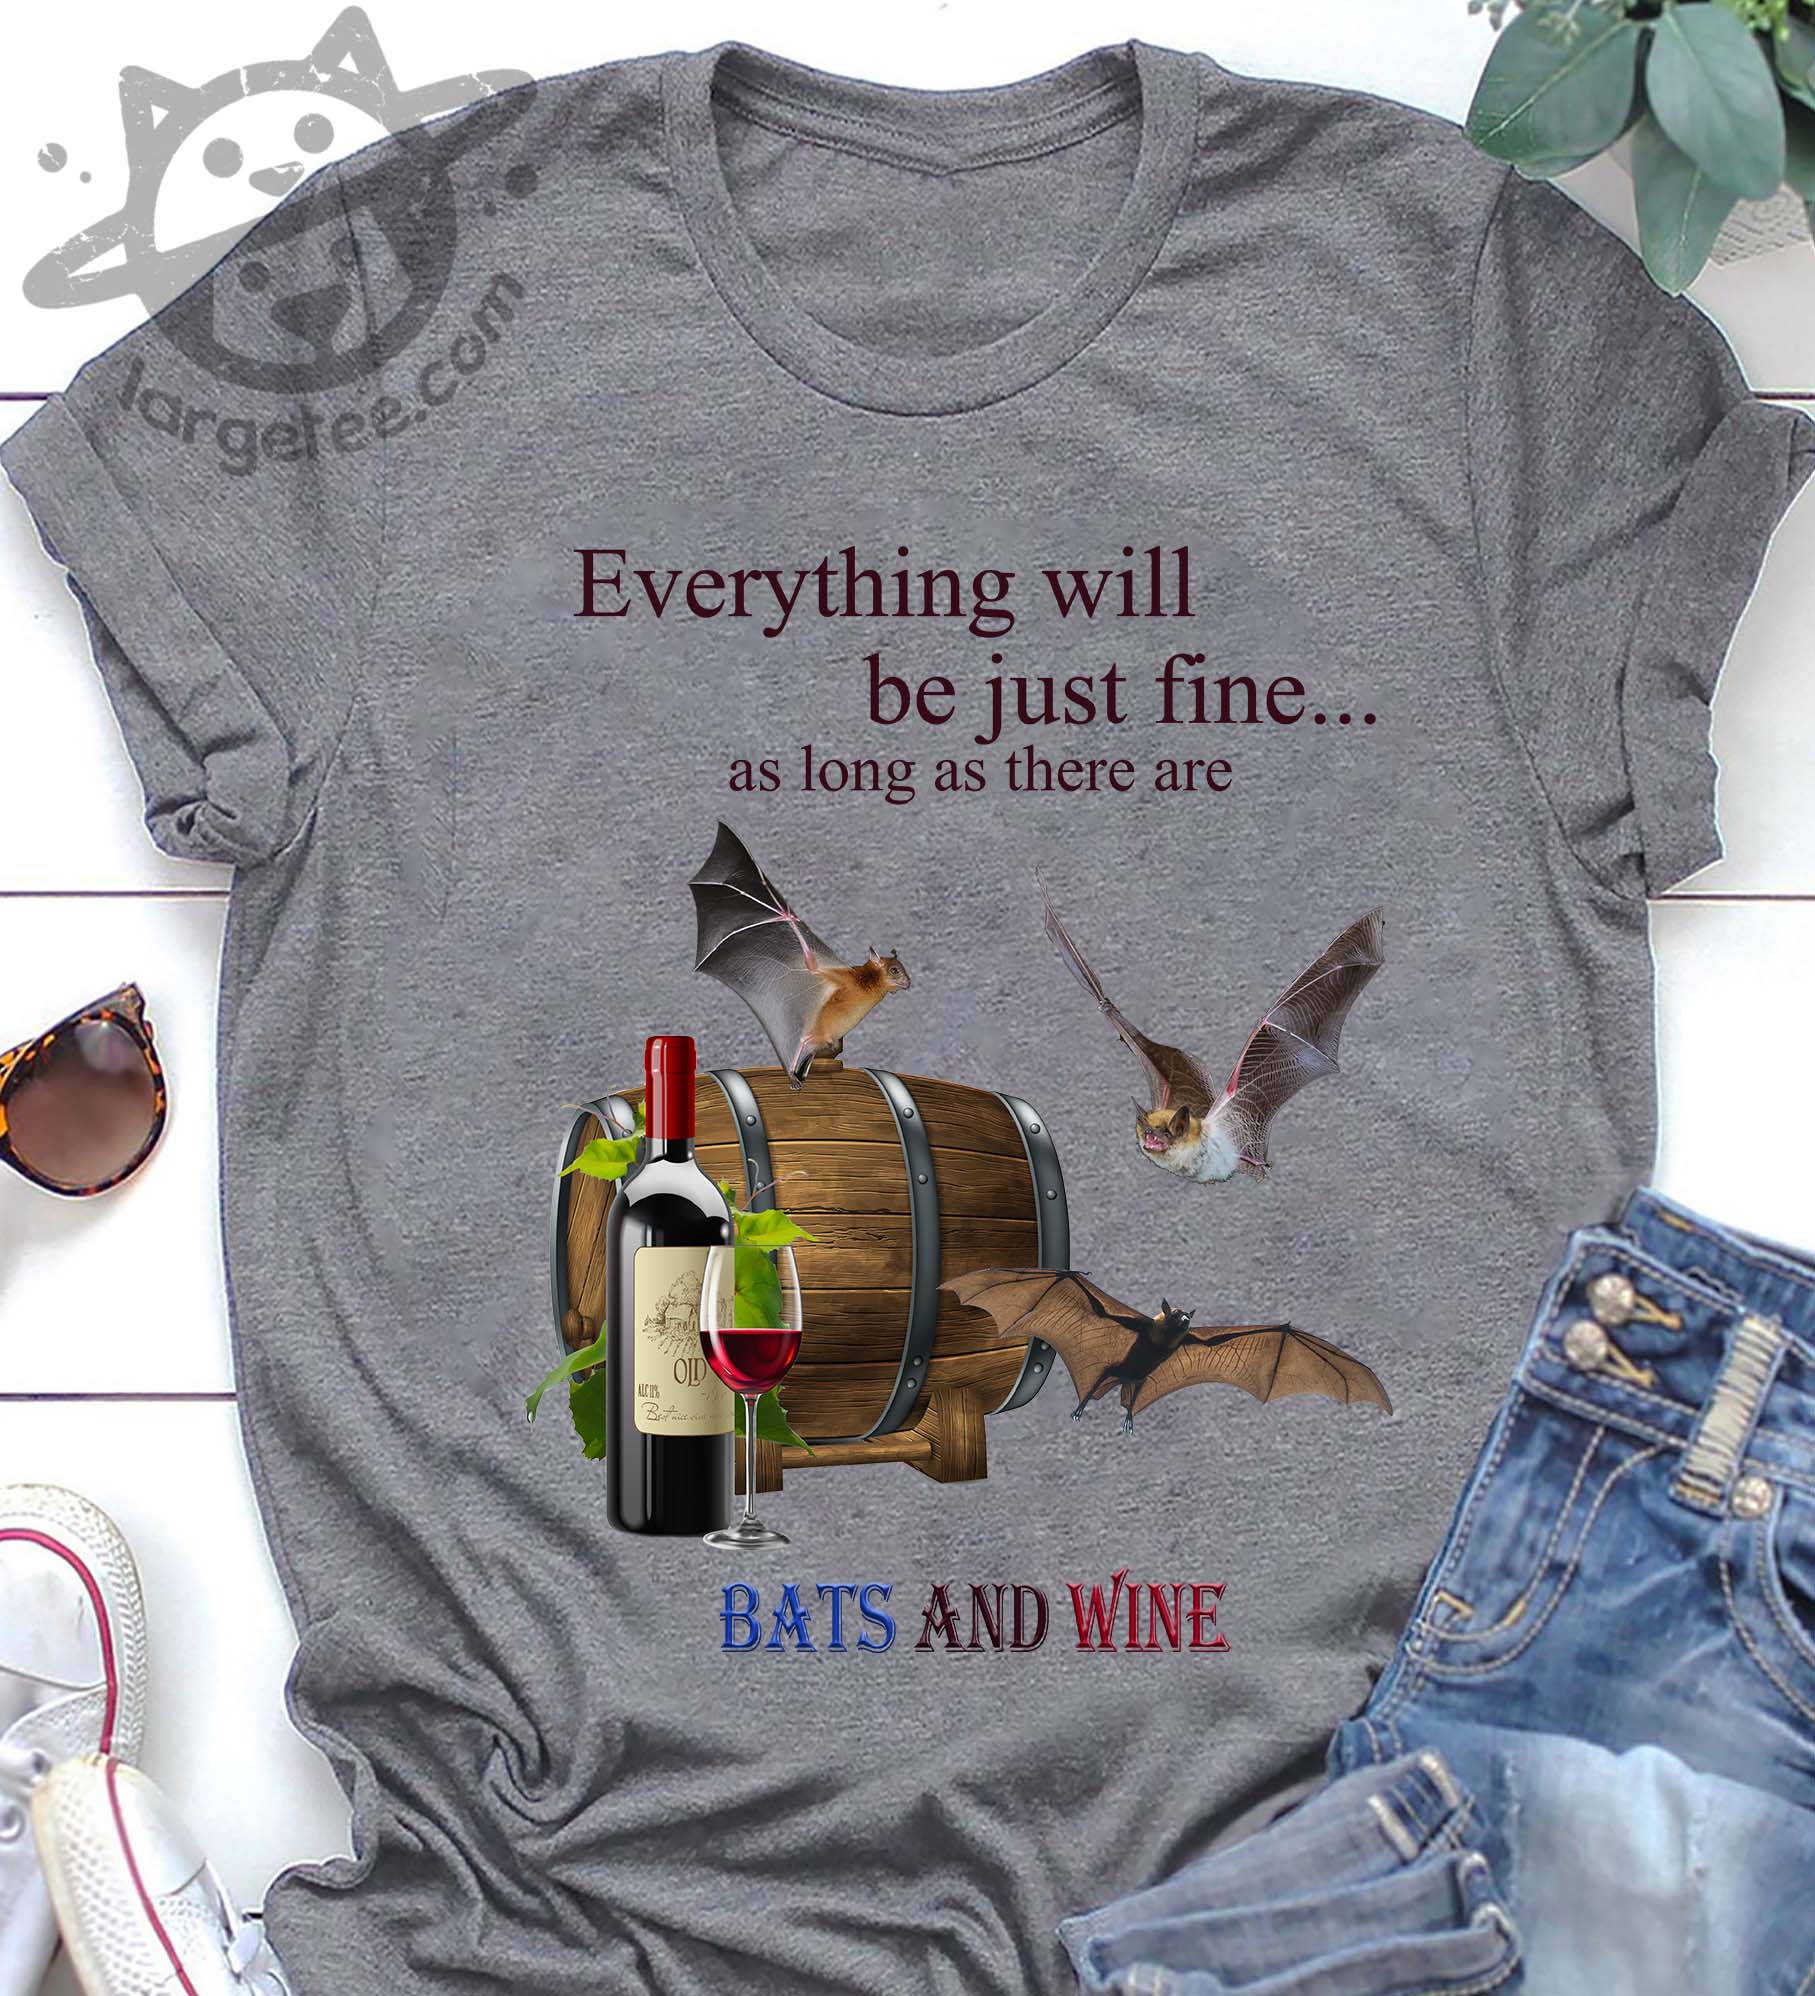 Everything will be just fine as long as there are Bats and wine